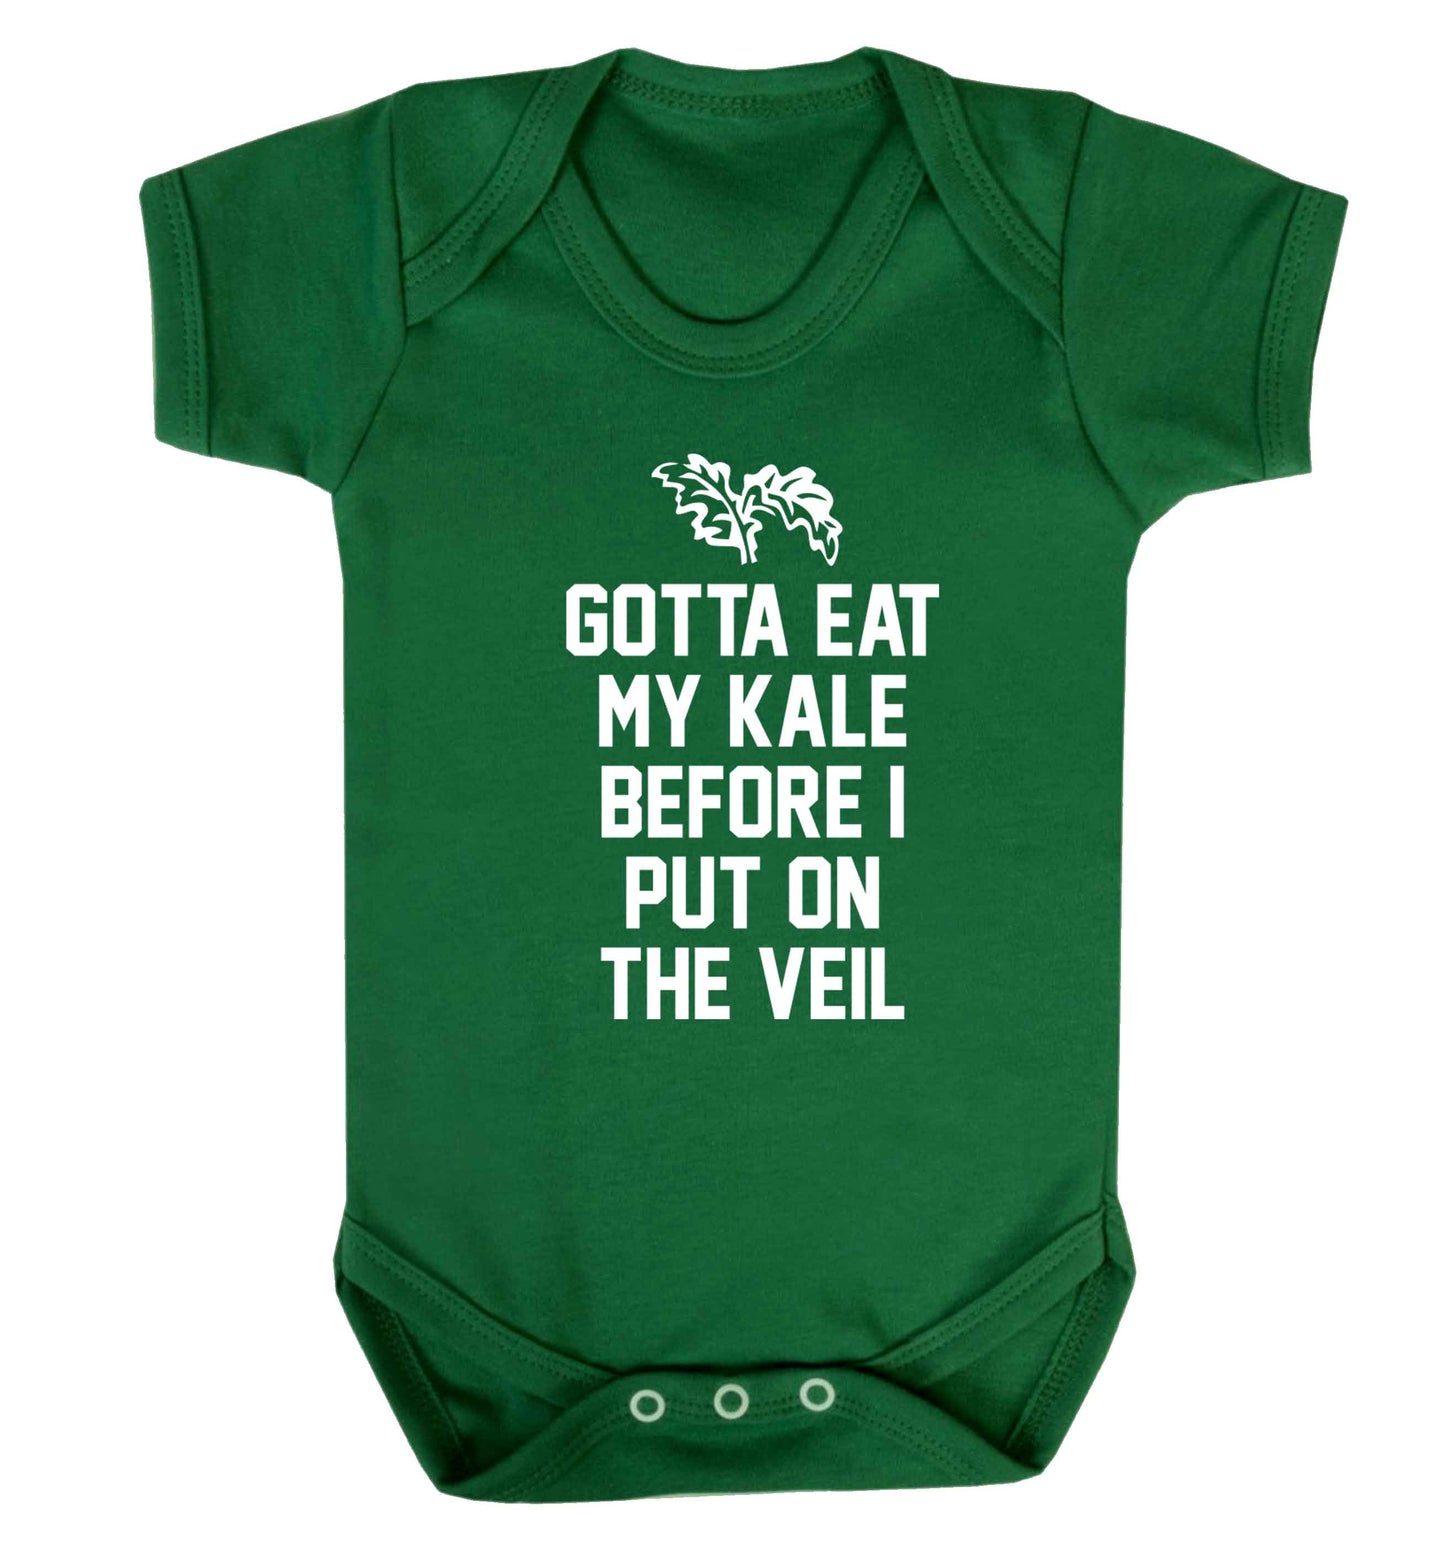 Gotta eat my kale before I put on the veil Baby Vest green 18-24 months